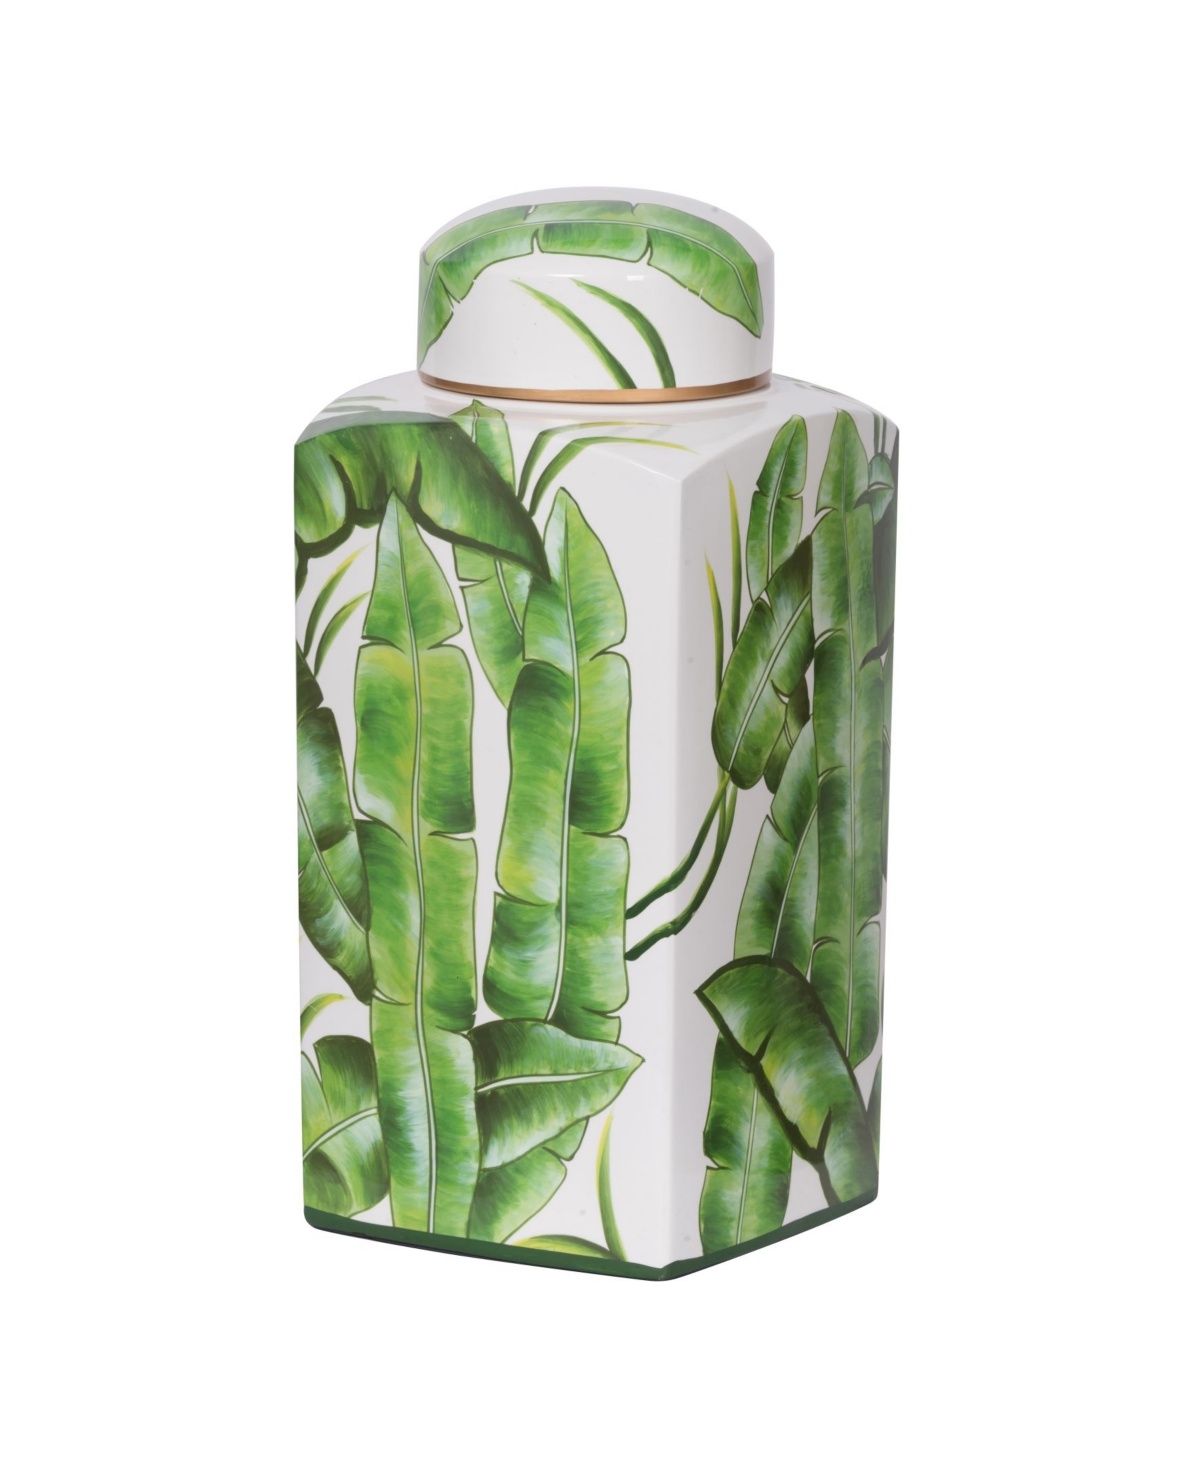 Ab Home Lovise Palm Square Jar In Green